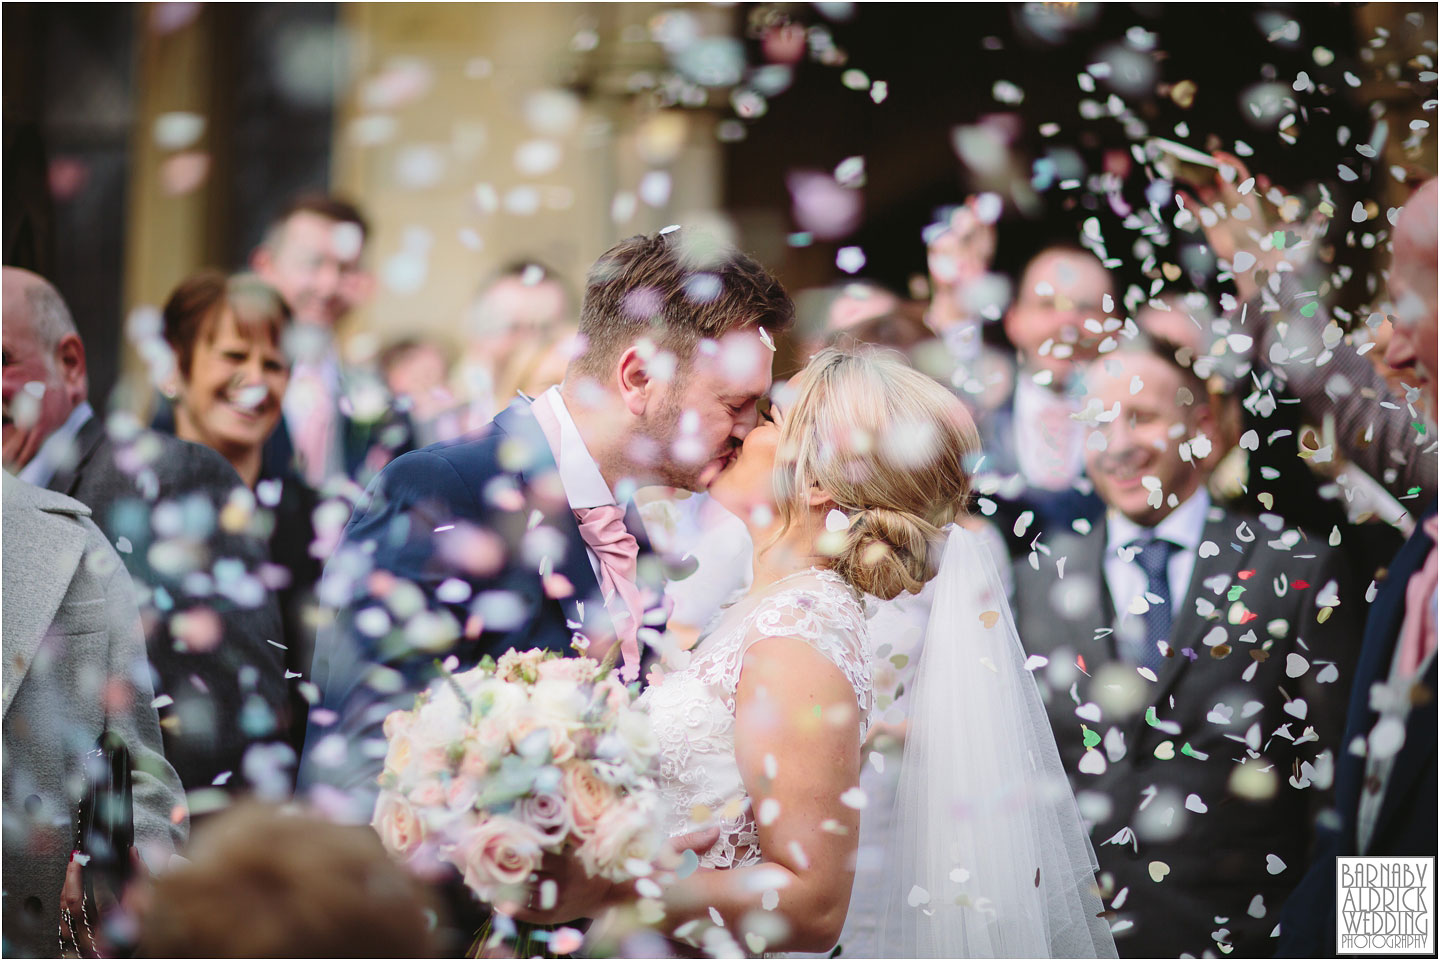 A bride and groom kiss as guests throw confetti at their wedding at The Pheasant in Harome near Helmsley in North Yorkshire